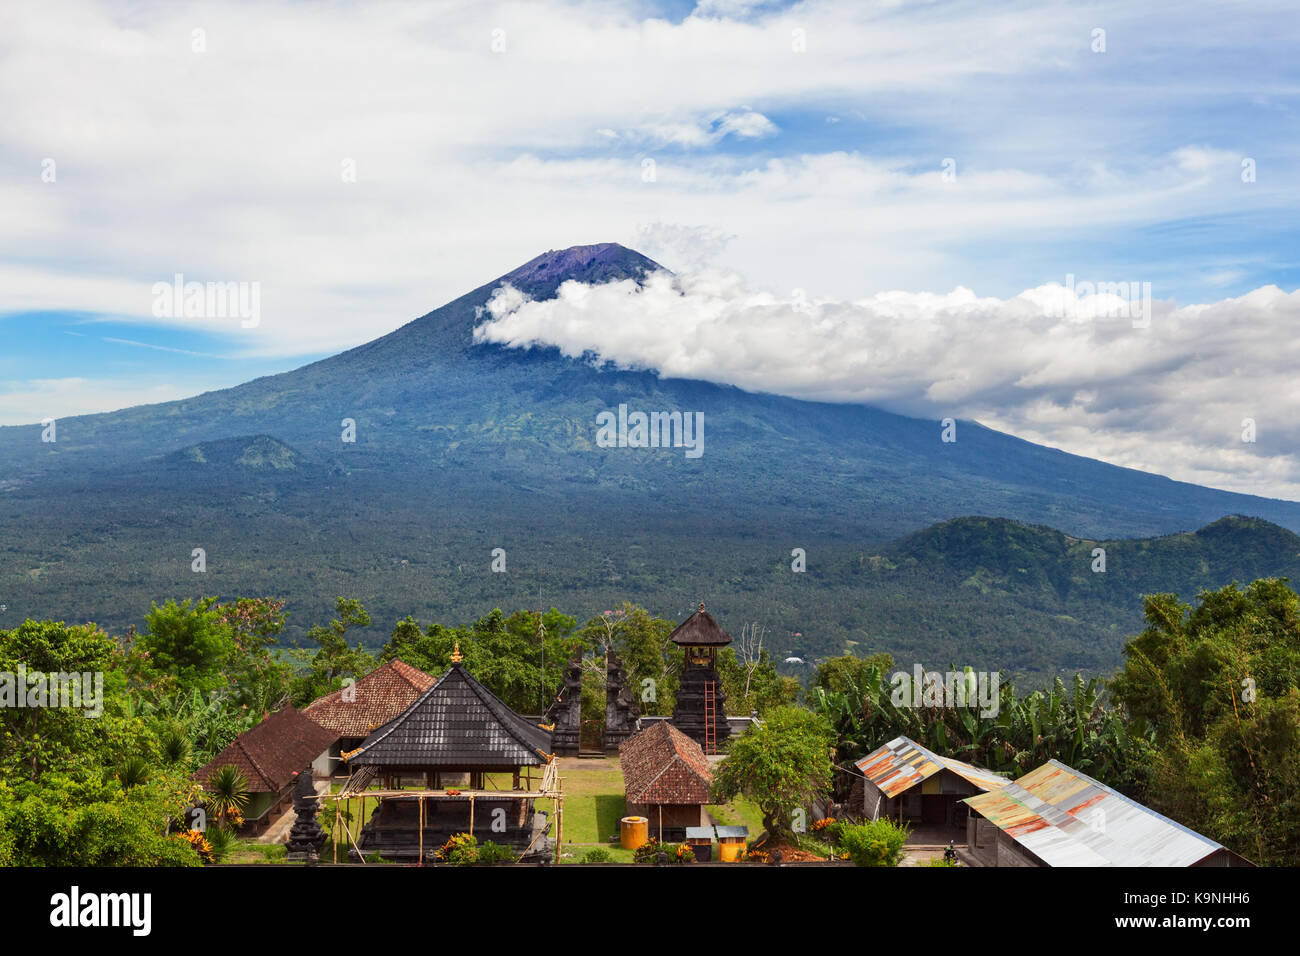 View from Lempuyang mountain to traditional Balinese temple on Mount Agung slopes background. Mount Agung is highest active volcano on Bali island Stock Photo